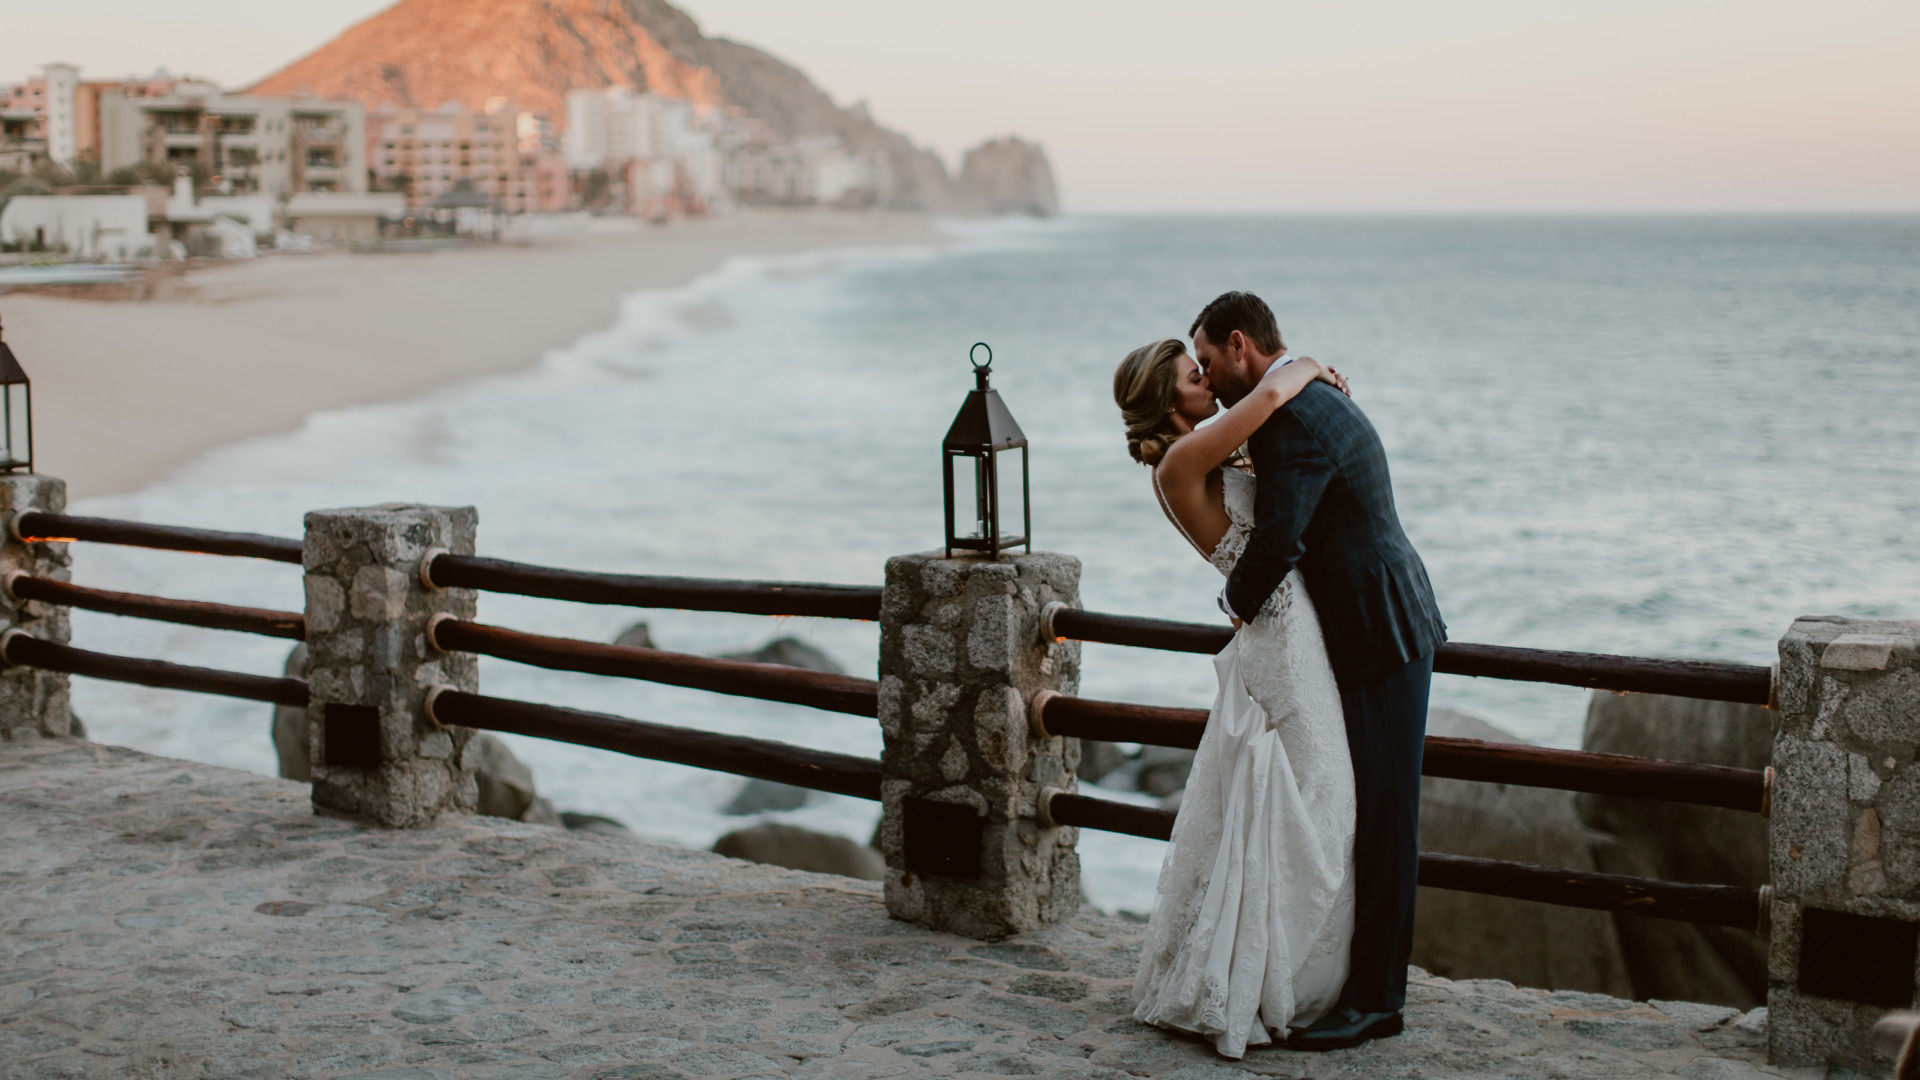 Bride and groom embracing with sea view